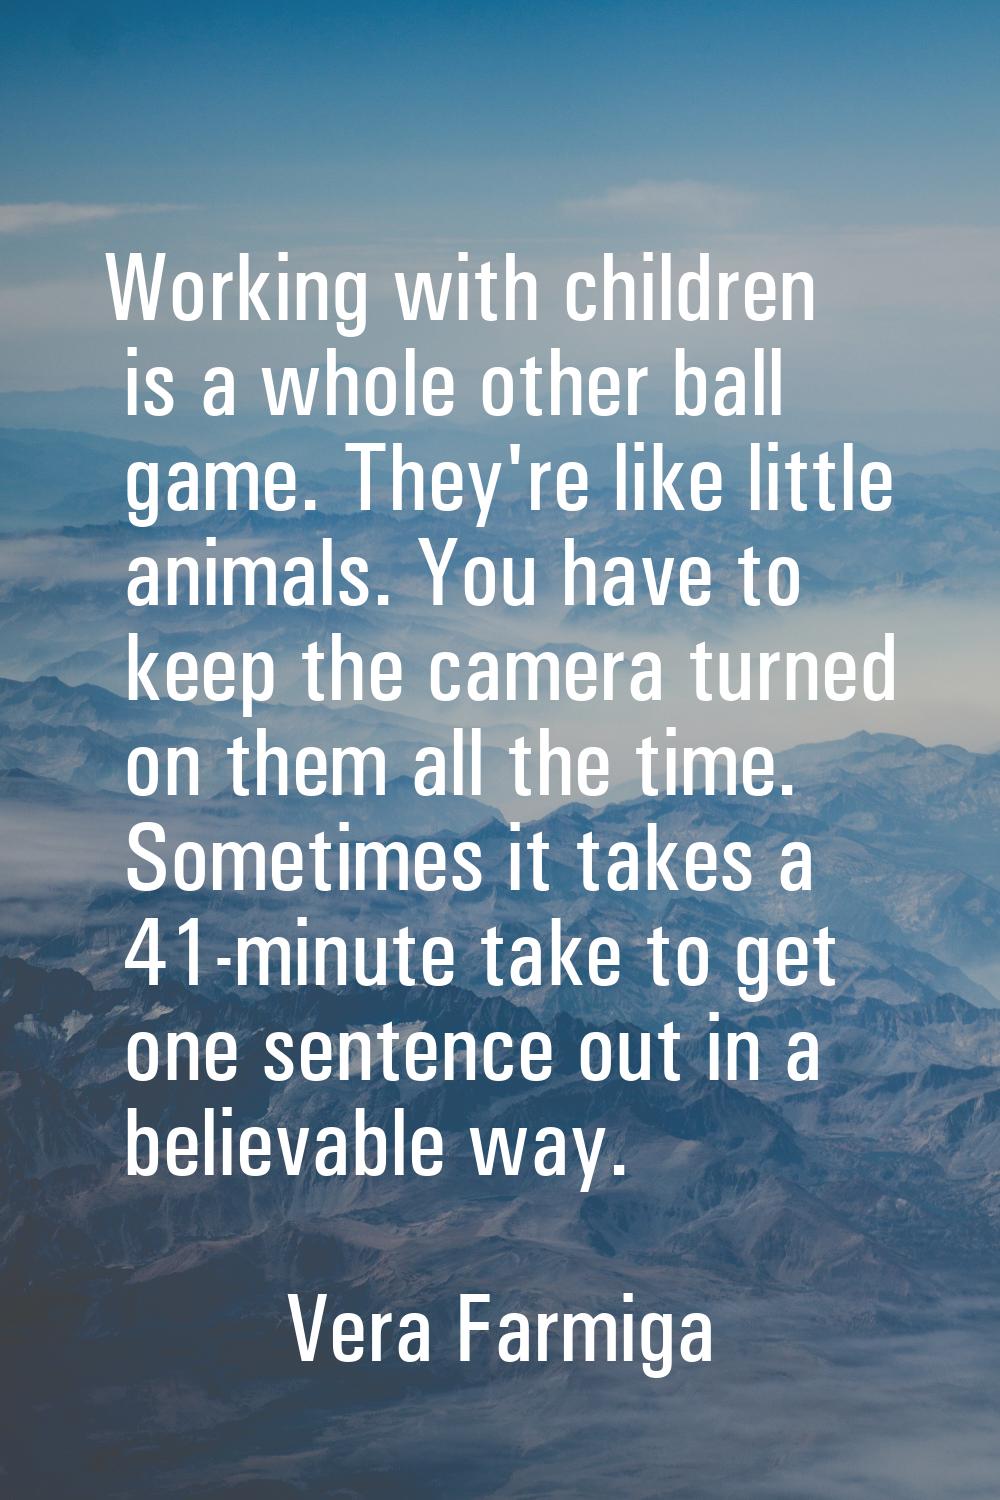 Working with children is a whole other ball game. They're like little animals. You have to keep the